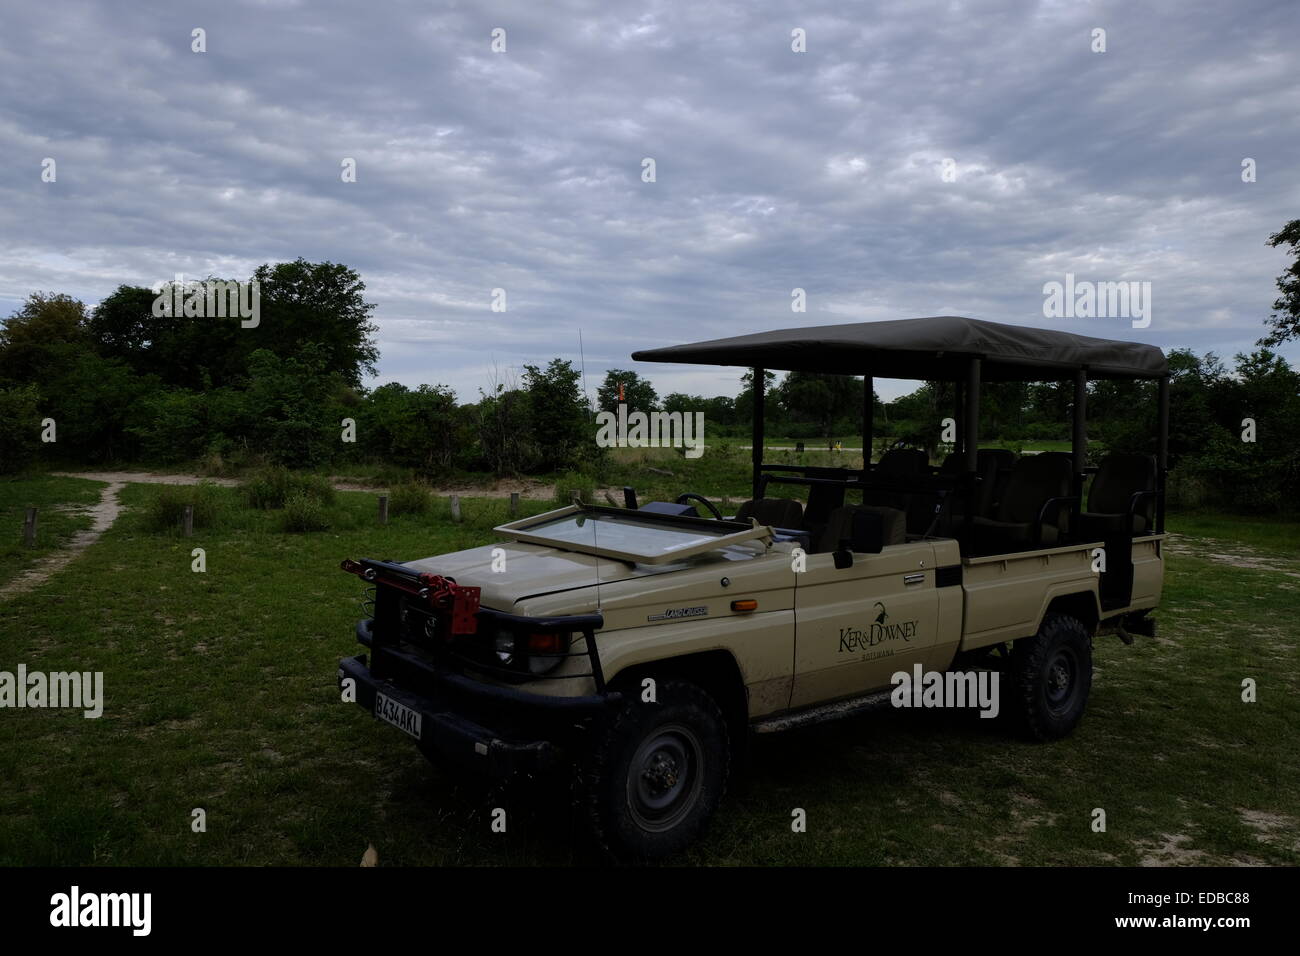 A game viewing vehicle in the late afternoon under cloudy skies Botswana Stock Photo